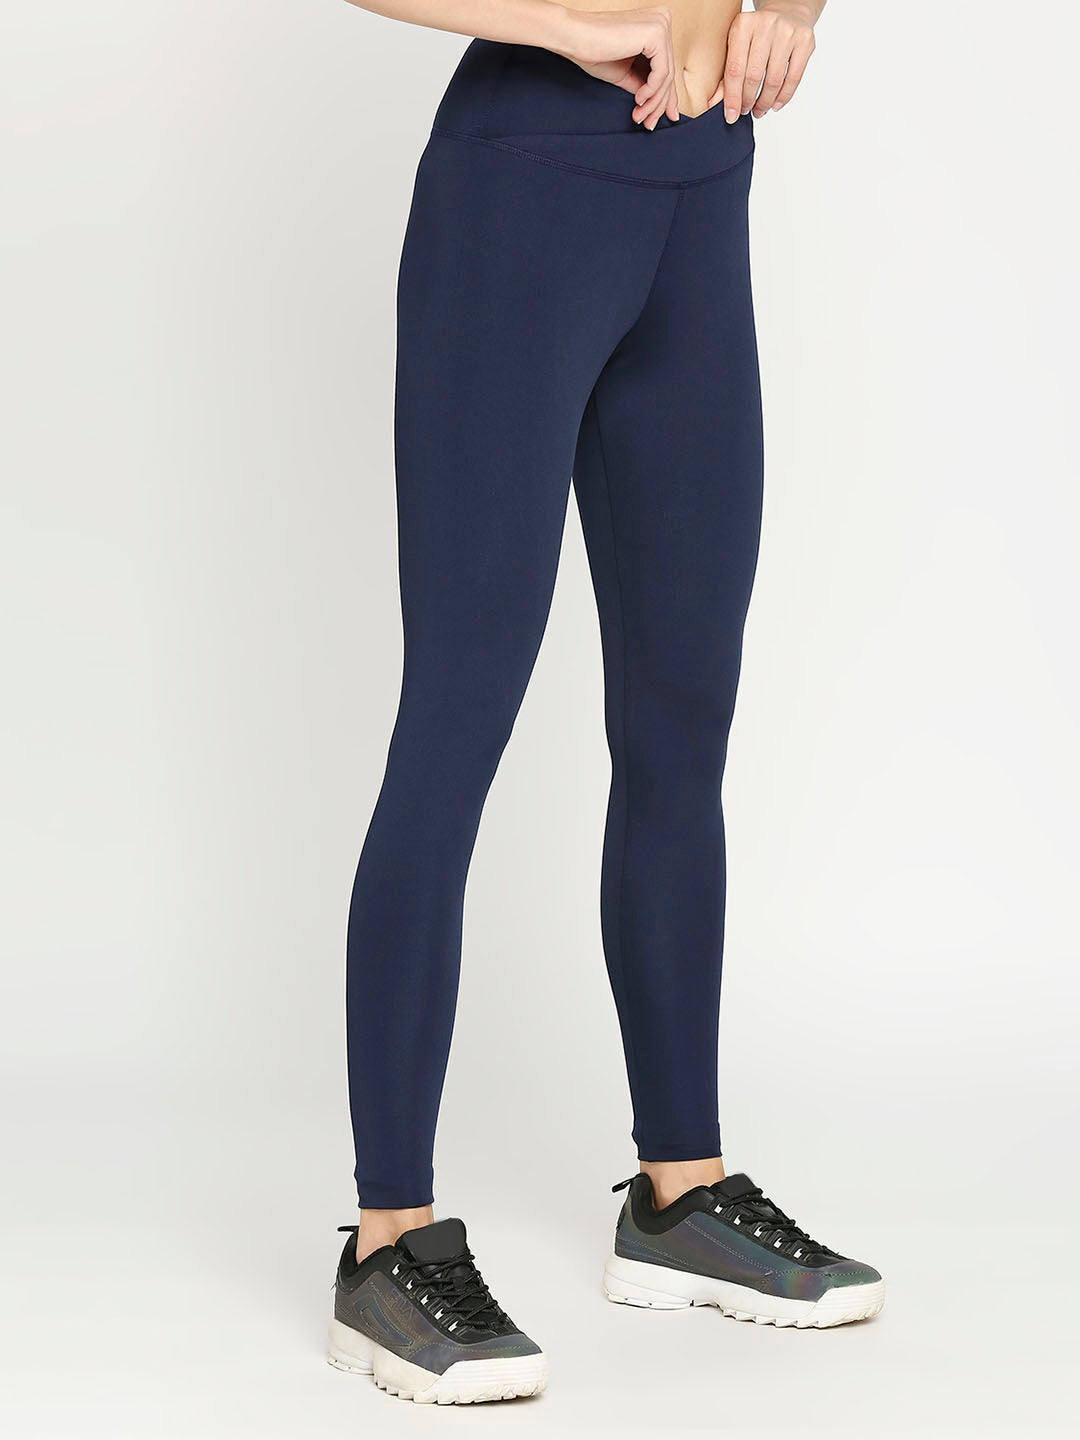 Women's Navy Blue Sports Leggings - Stay Comfortable and Stylish